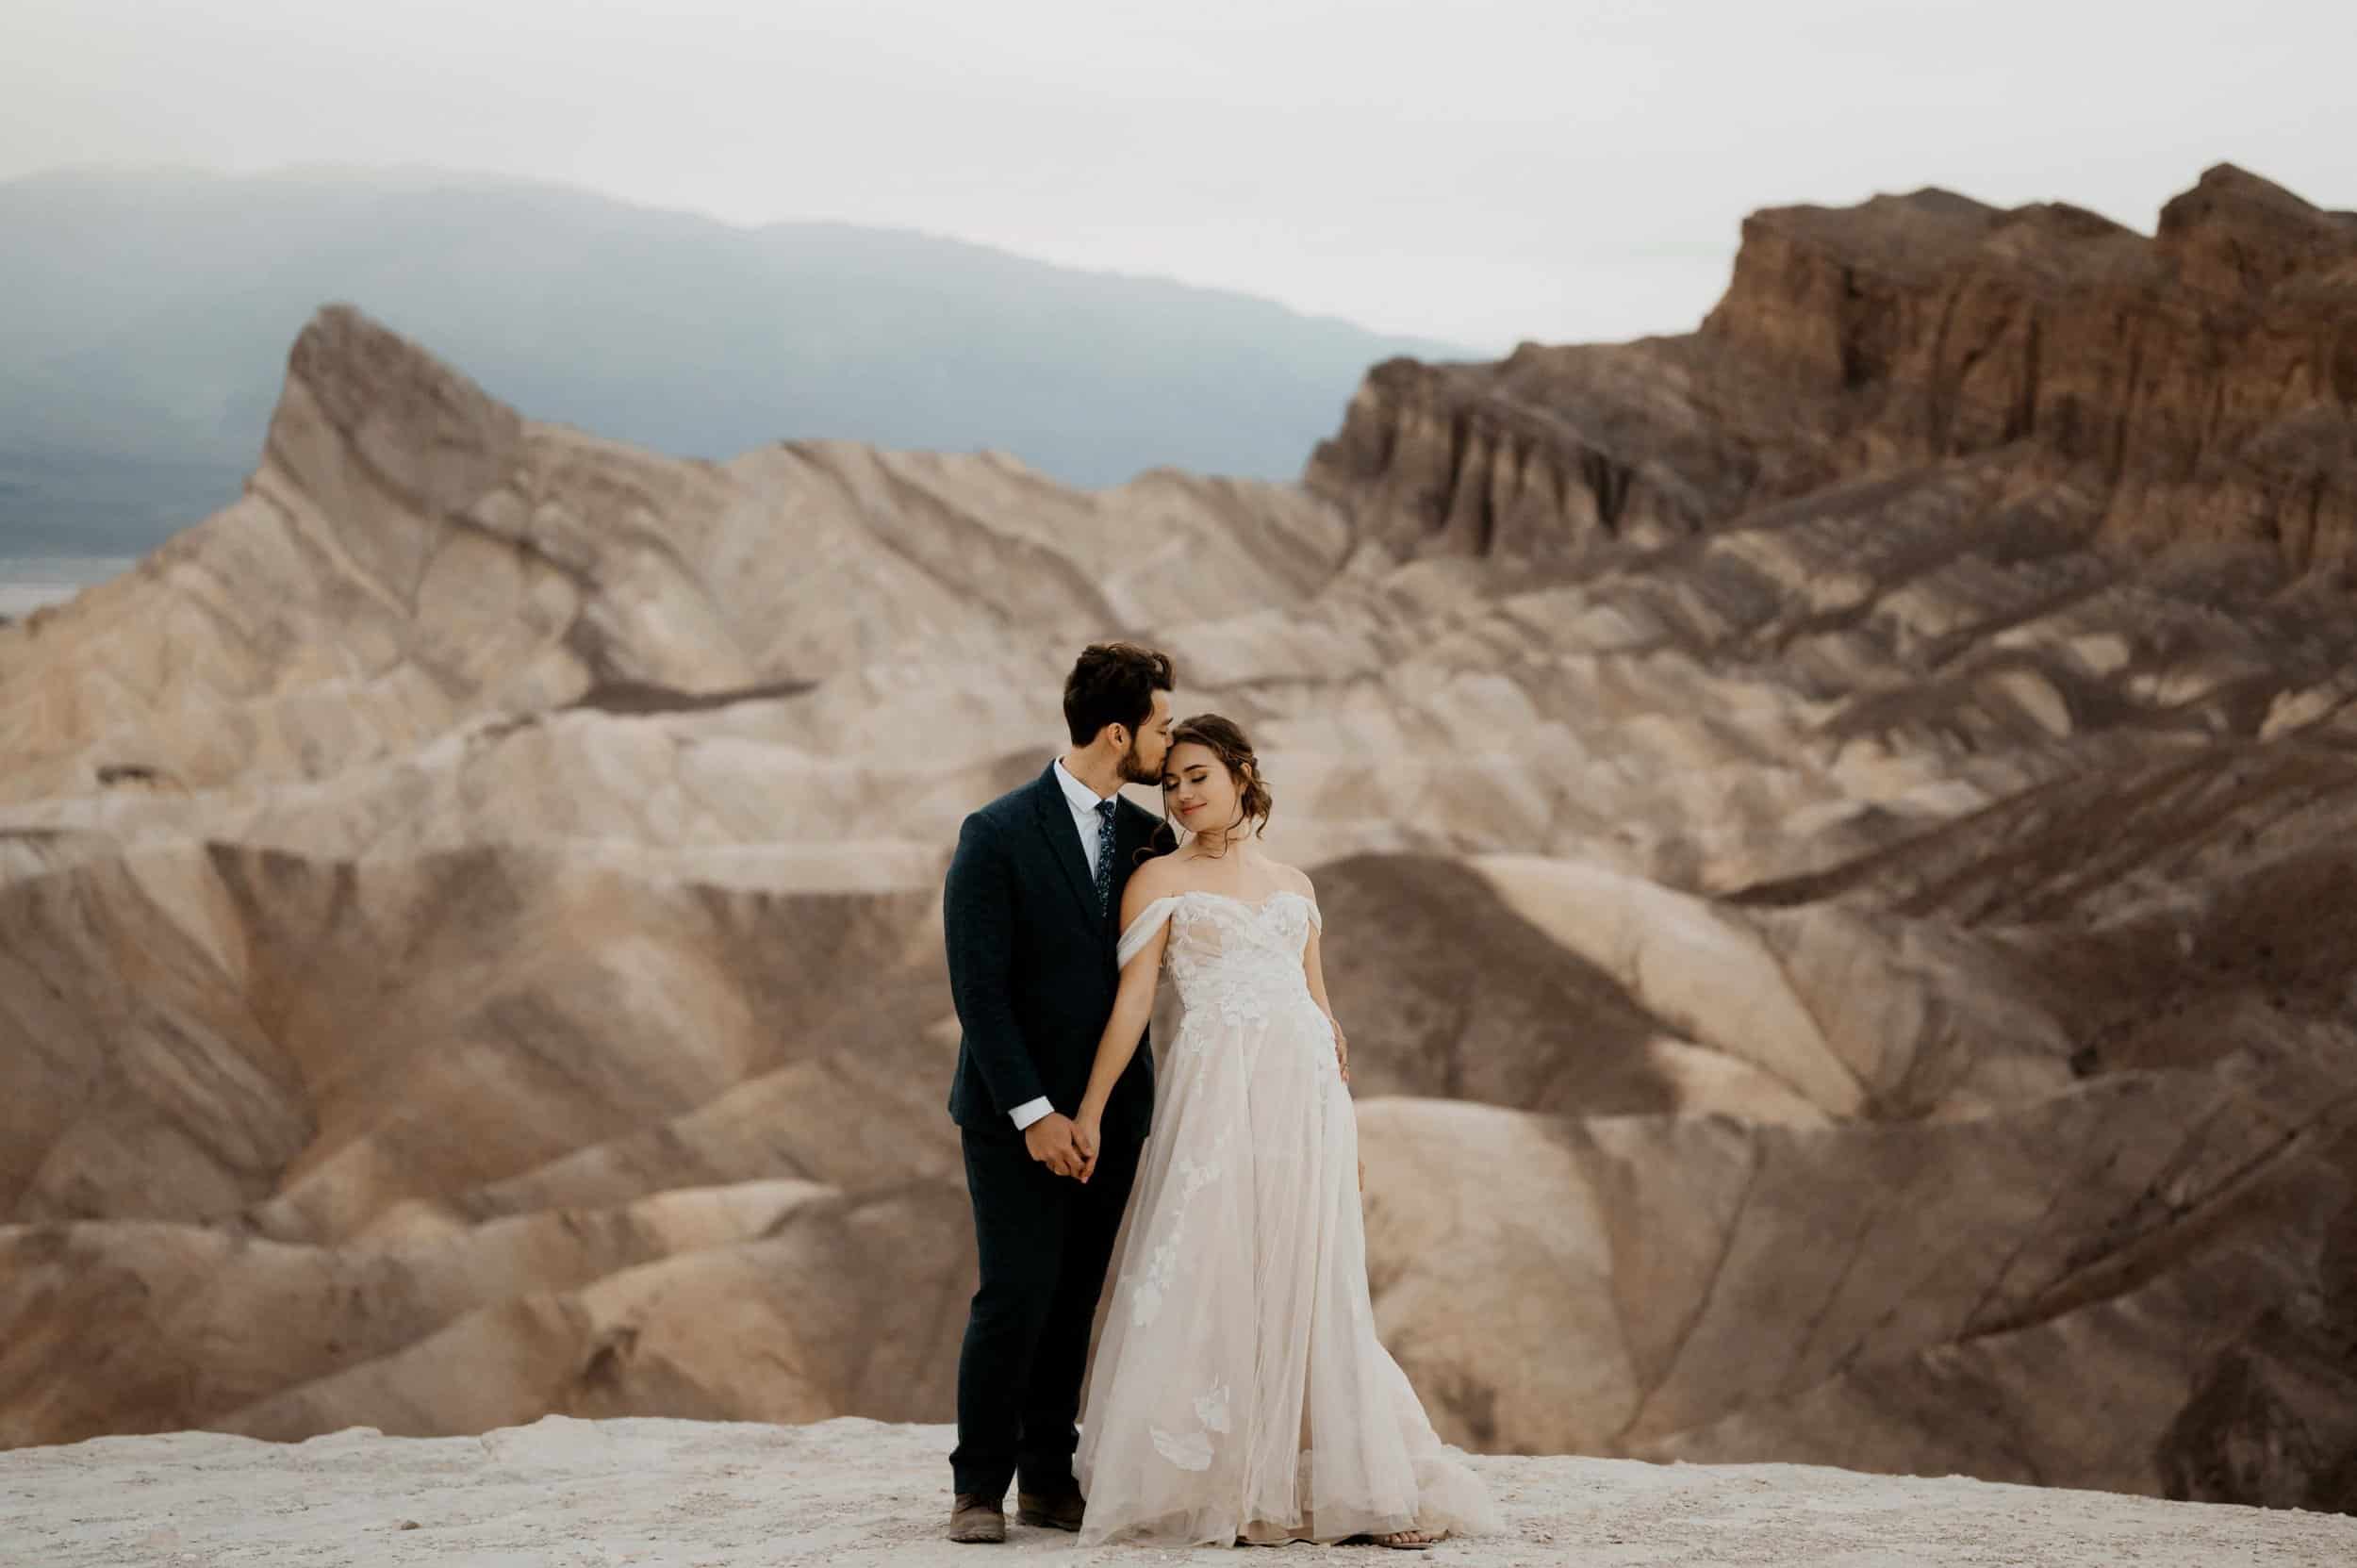 Desert Elopement Guide: Discover the Best Desert Locations in the US